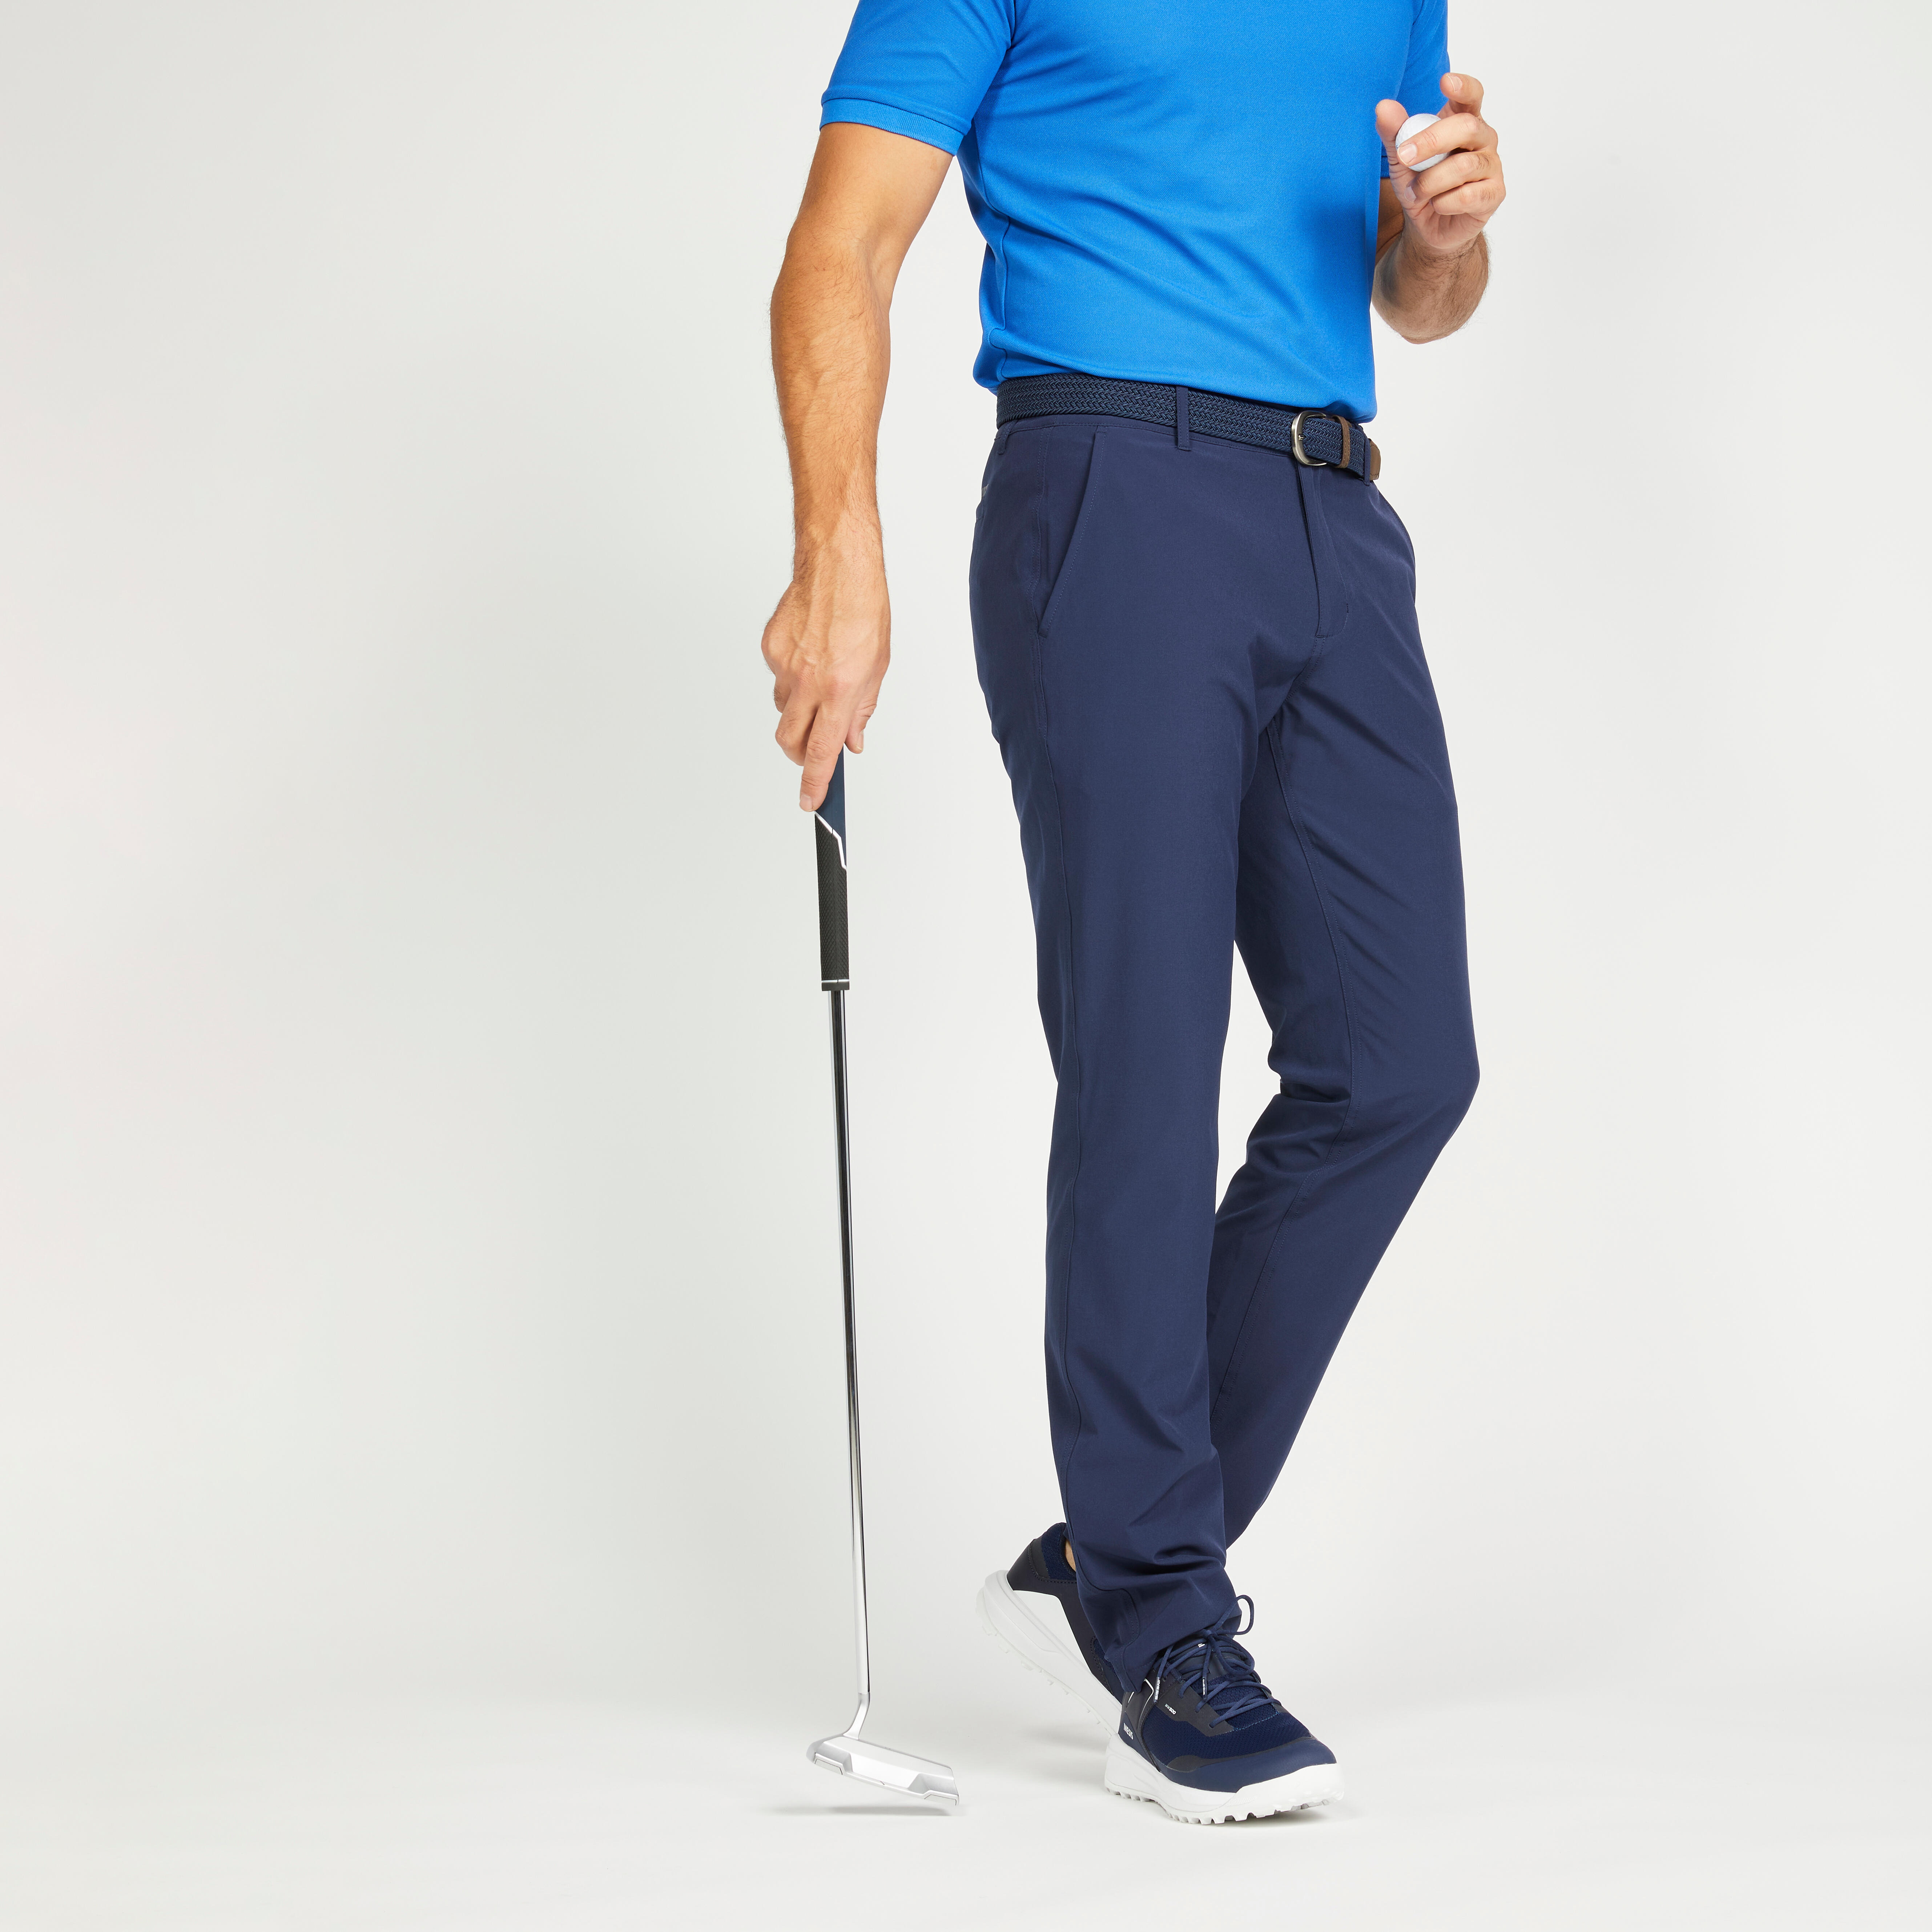 Men's Golf Trousers Quick Drying Long Comfortable Leisure Trousers With  Pockets Lightweight Casual Sports Pants Thin Casual - AliExpress